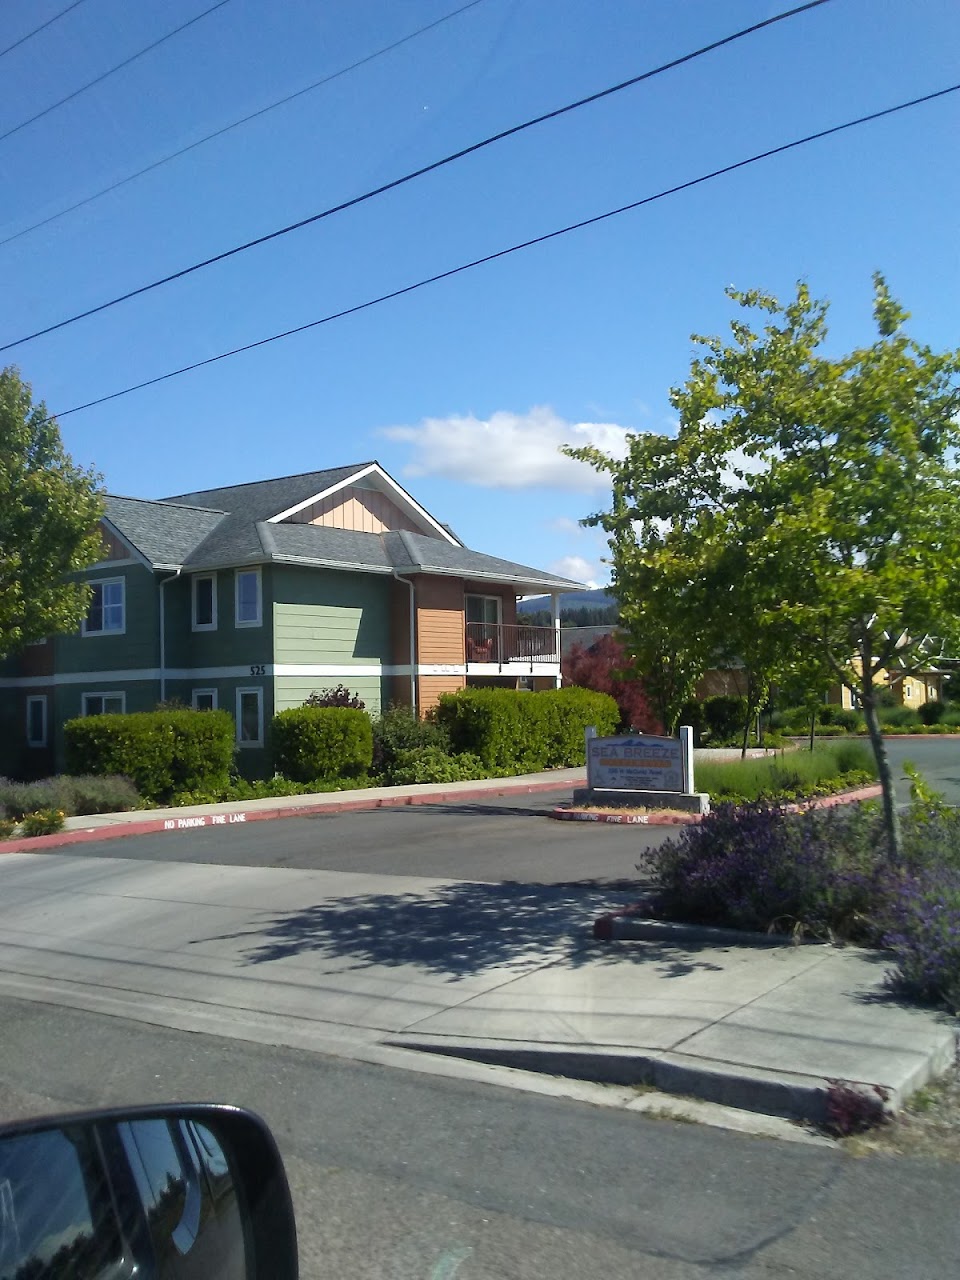 Photo of SEA BREEZE APARTMENTS. Affordable housing located at 525 W. MCCURDY RD SEQUIM, WA 98382